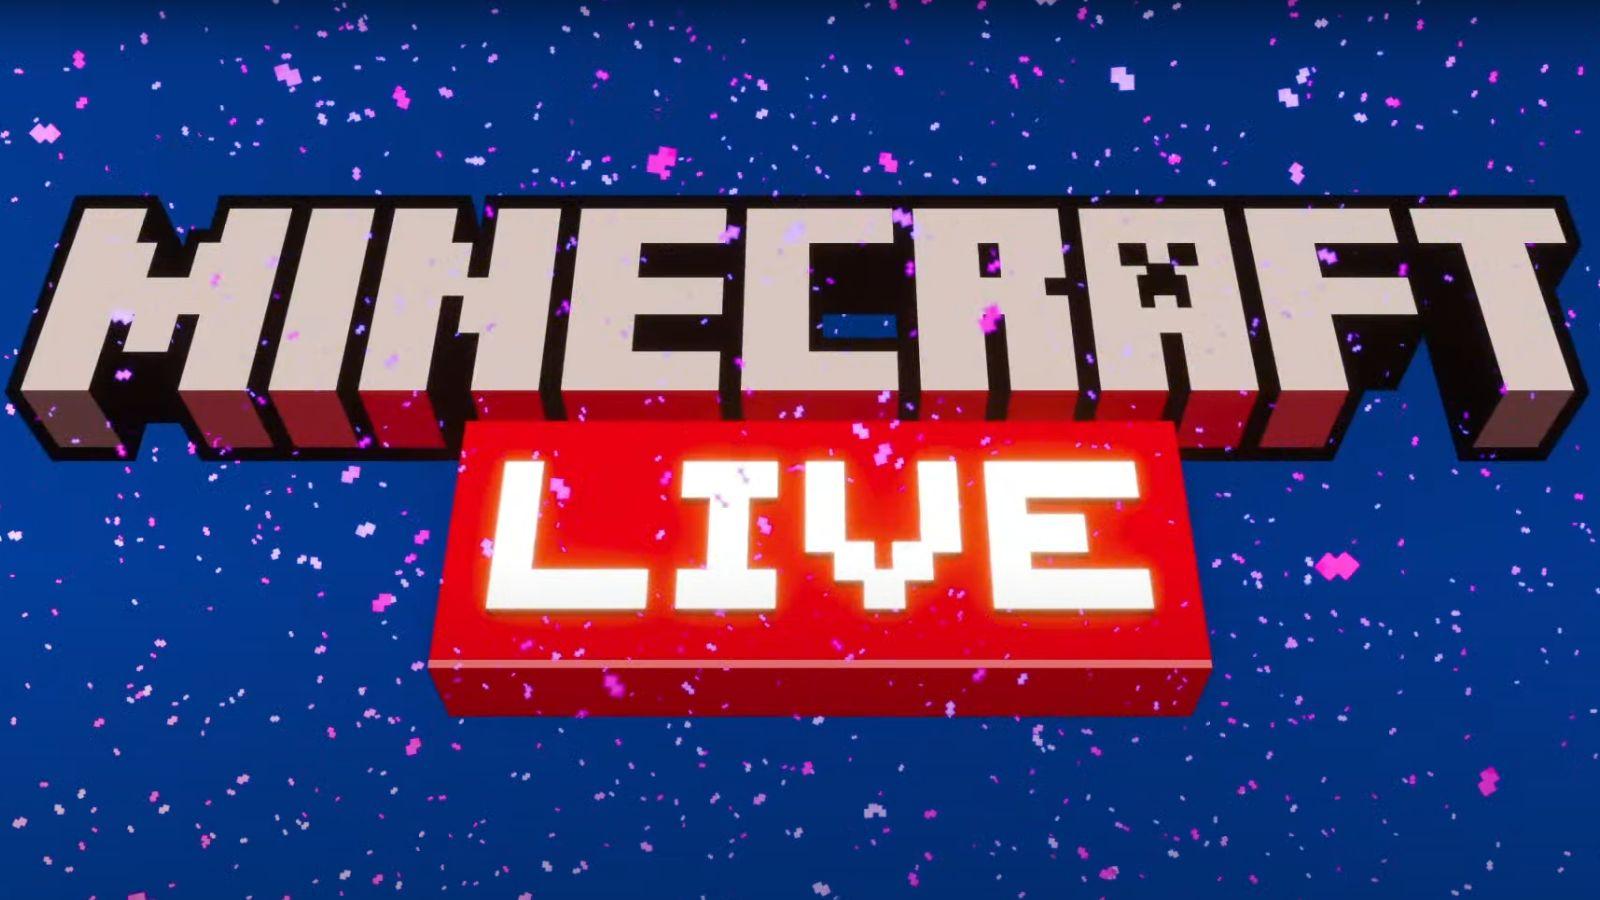 Minecraft Live 2023: Date, time, mob vote & how to watch - Dexerto